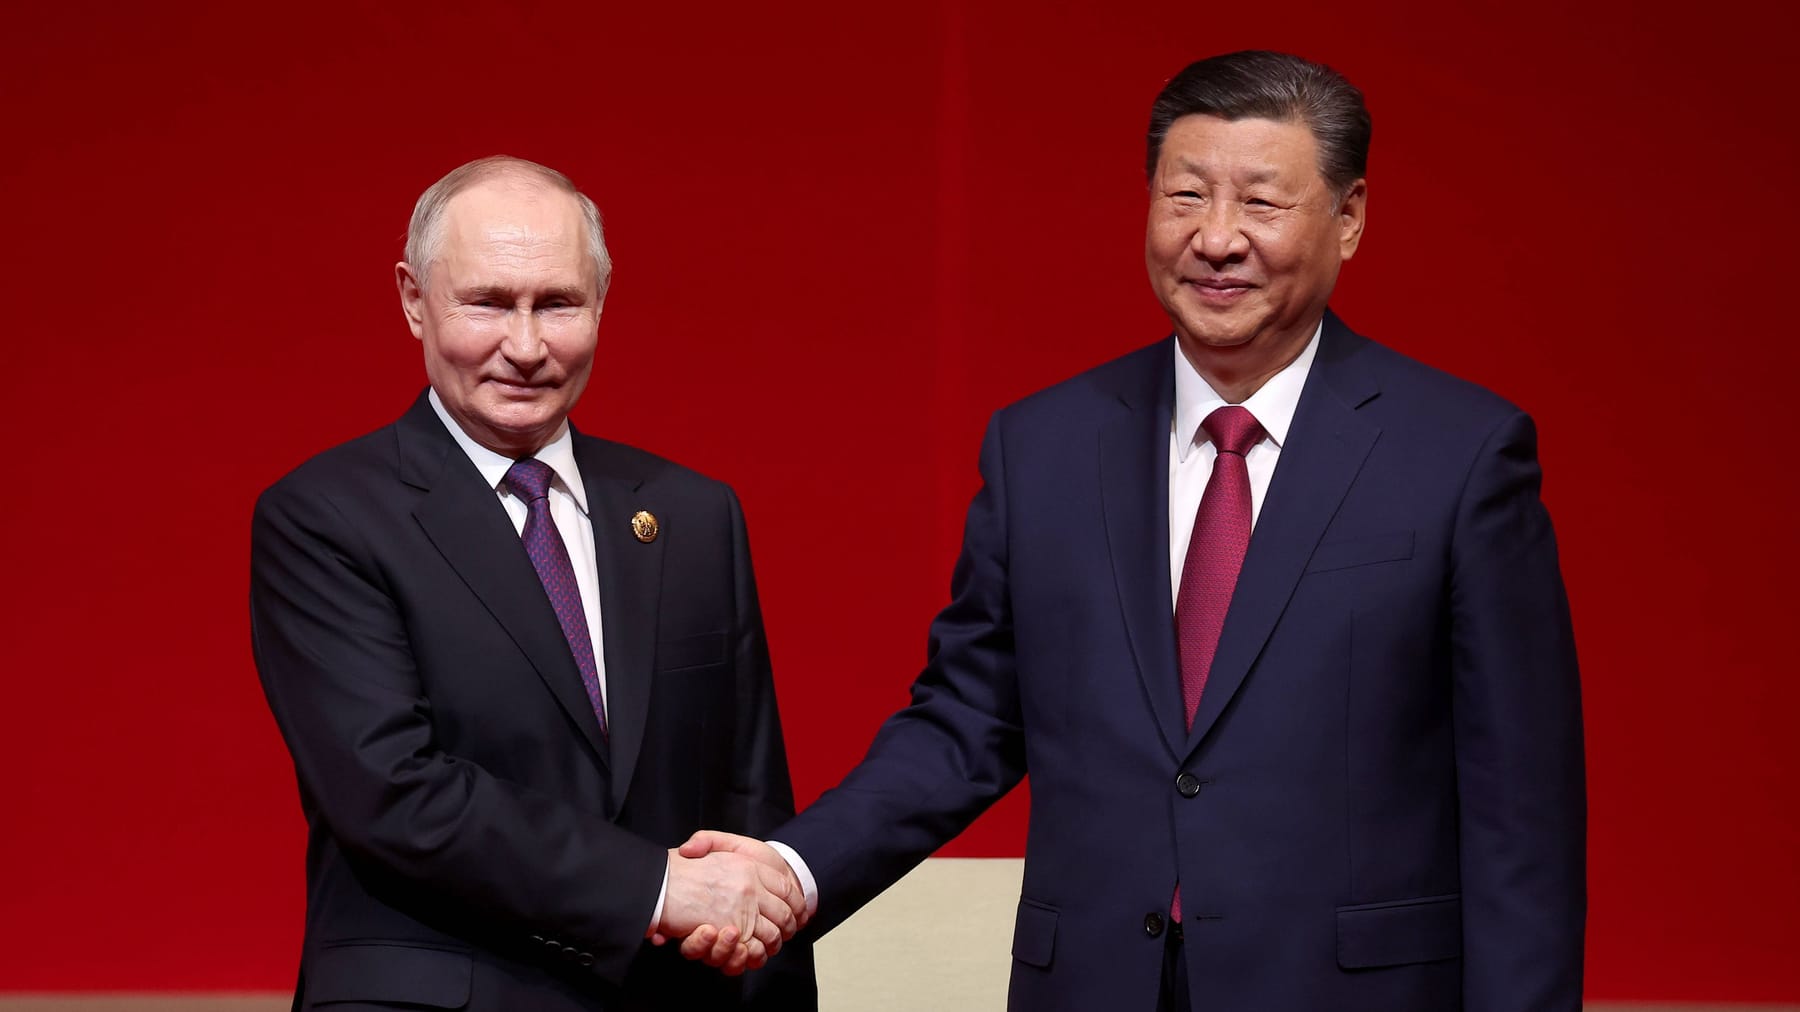 “Xi Jinping is angry with Putin”